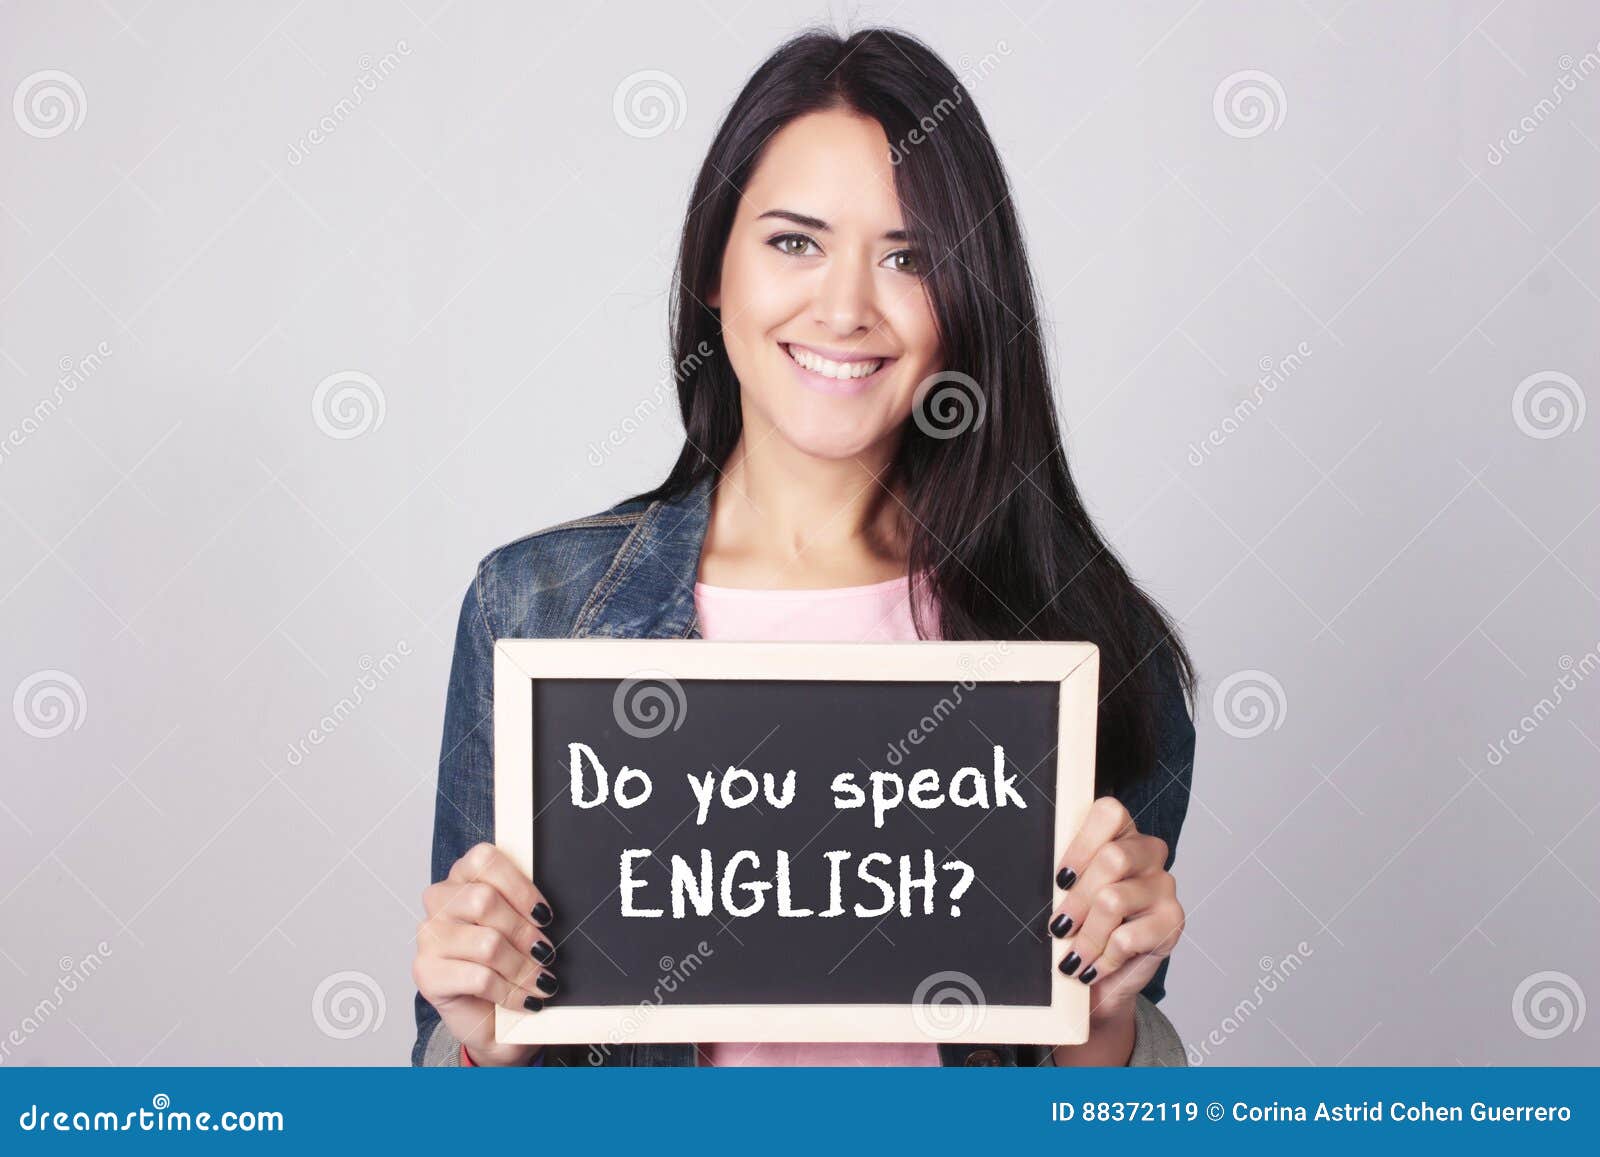 young woman holding chalkboard that says do you speak english?